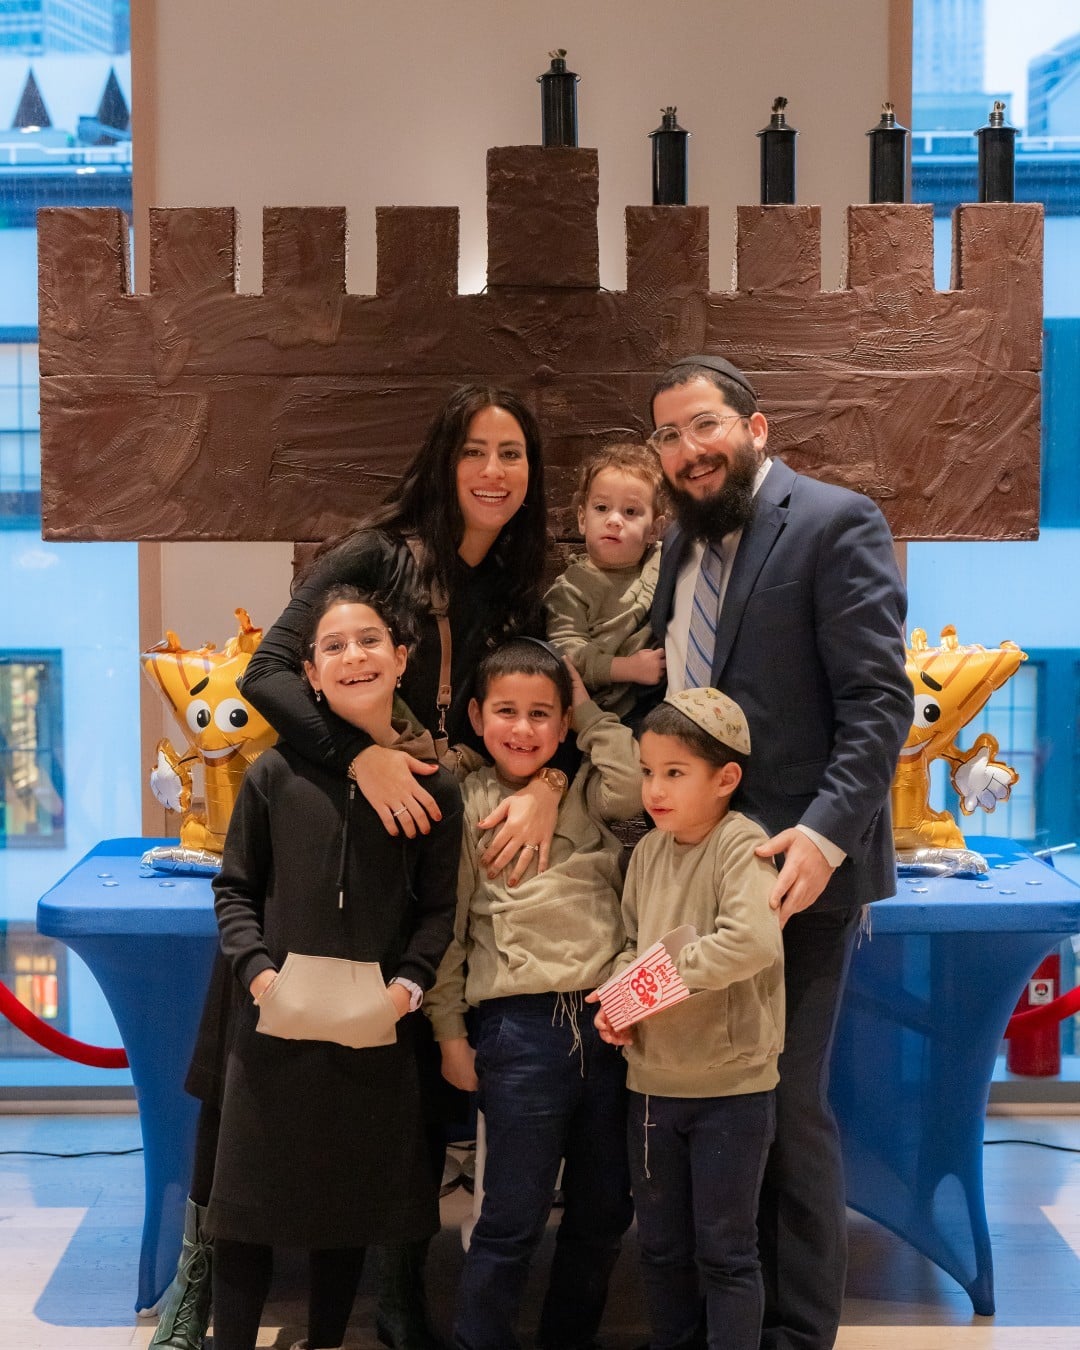 The annual Chanukah Menorah Lighting was filled with light, laughter and love. Thank you to our neighbors and the @jewishinglearningexperience for making it so special! Happy Chanukah to all who celebrate